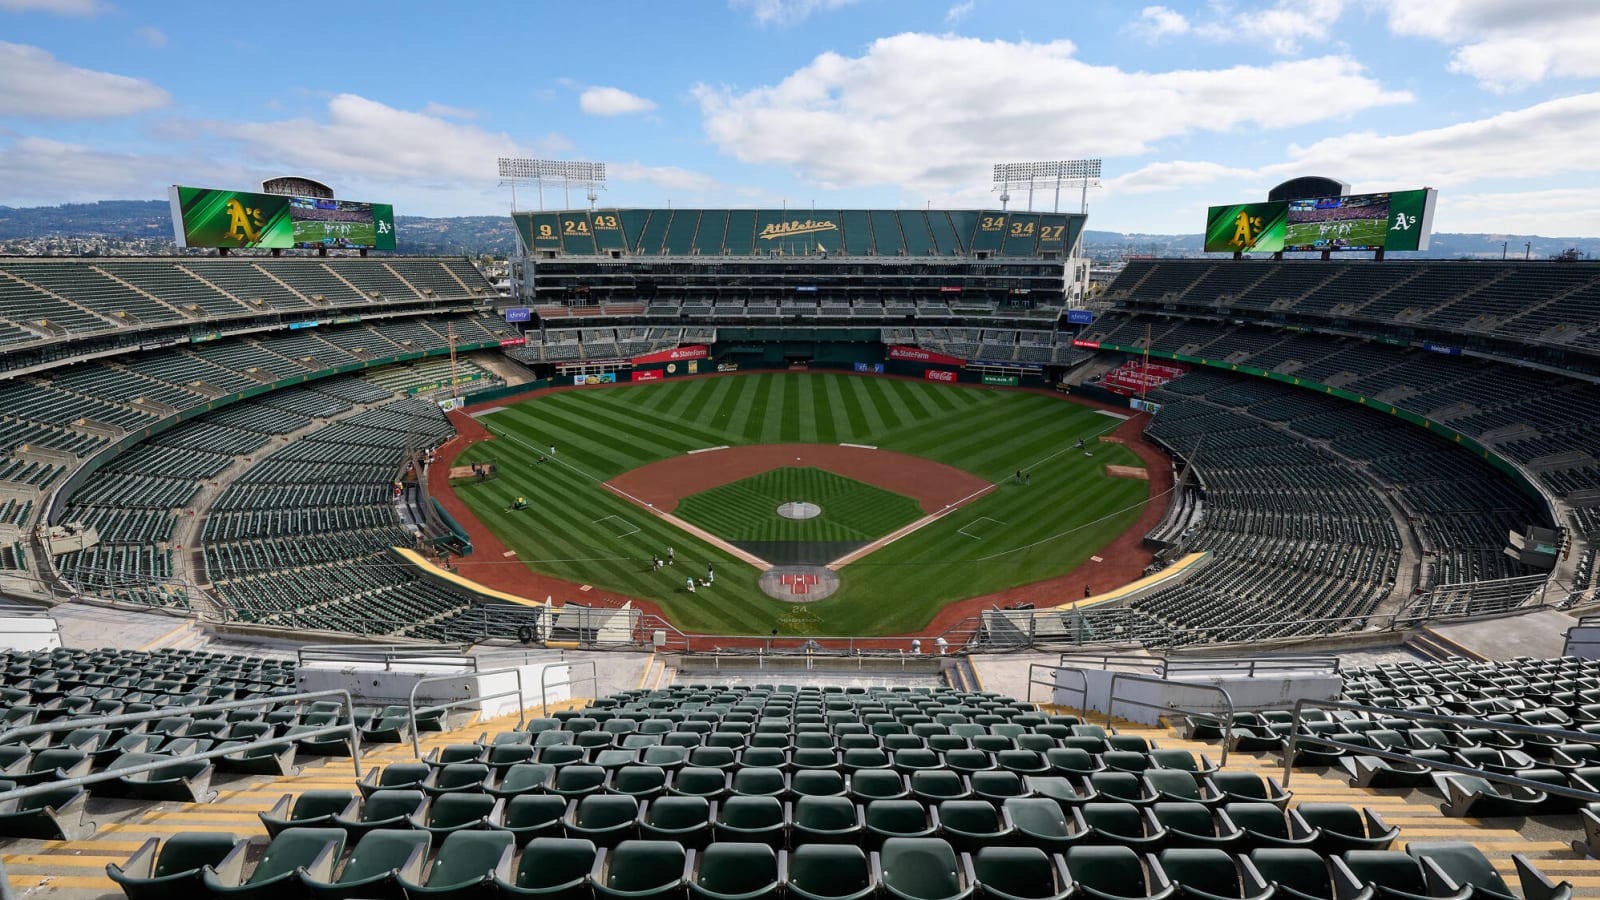 Athletics to meet with officials about Coliseum lease extension